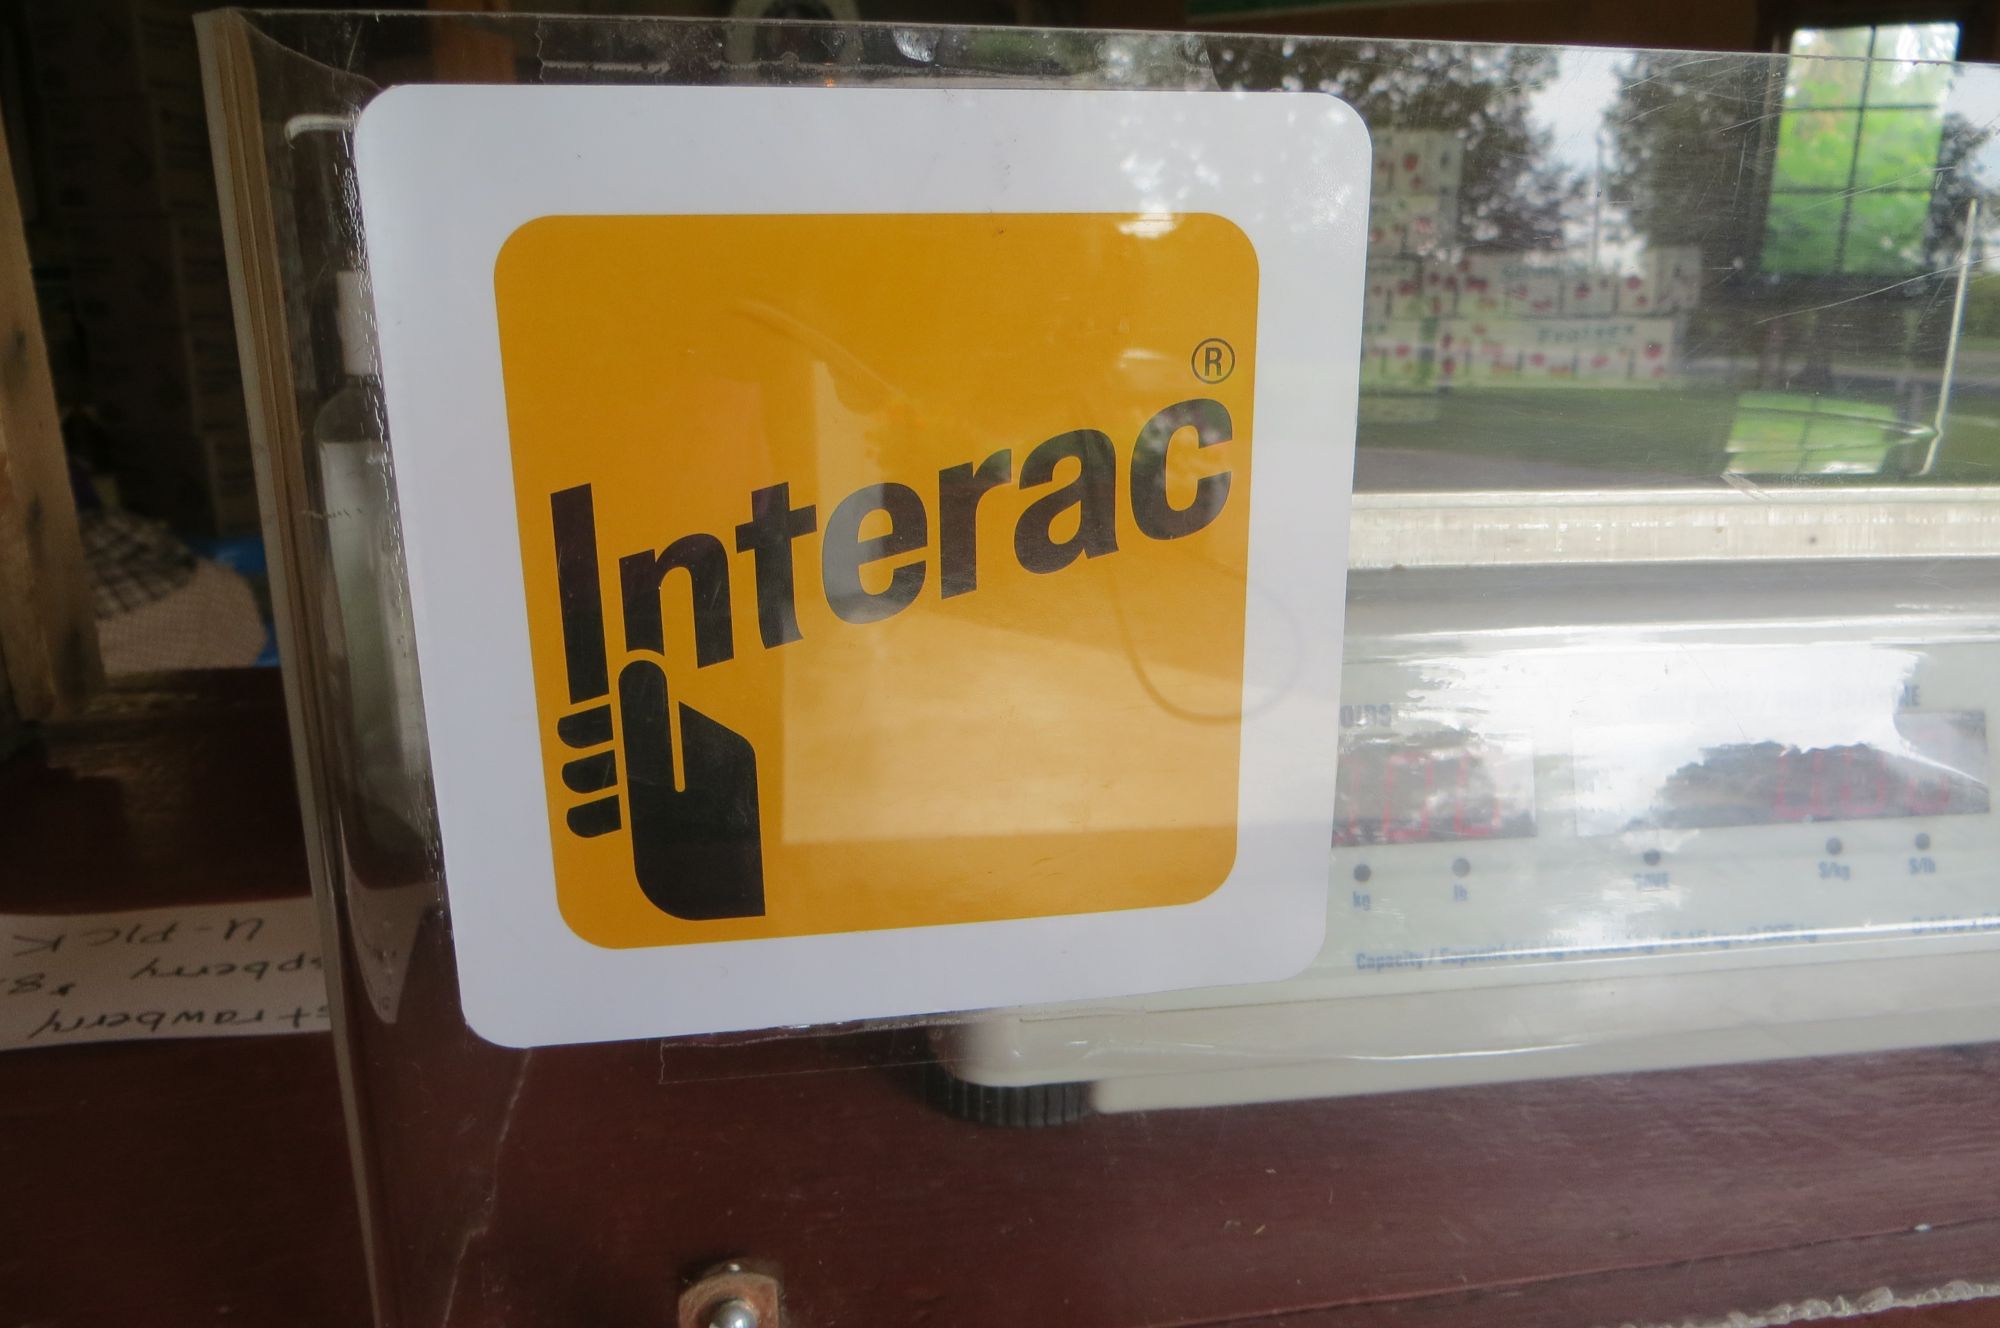 Interac now accepted at the farm